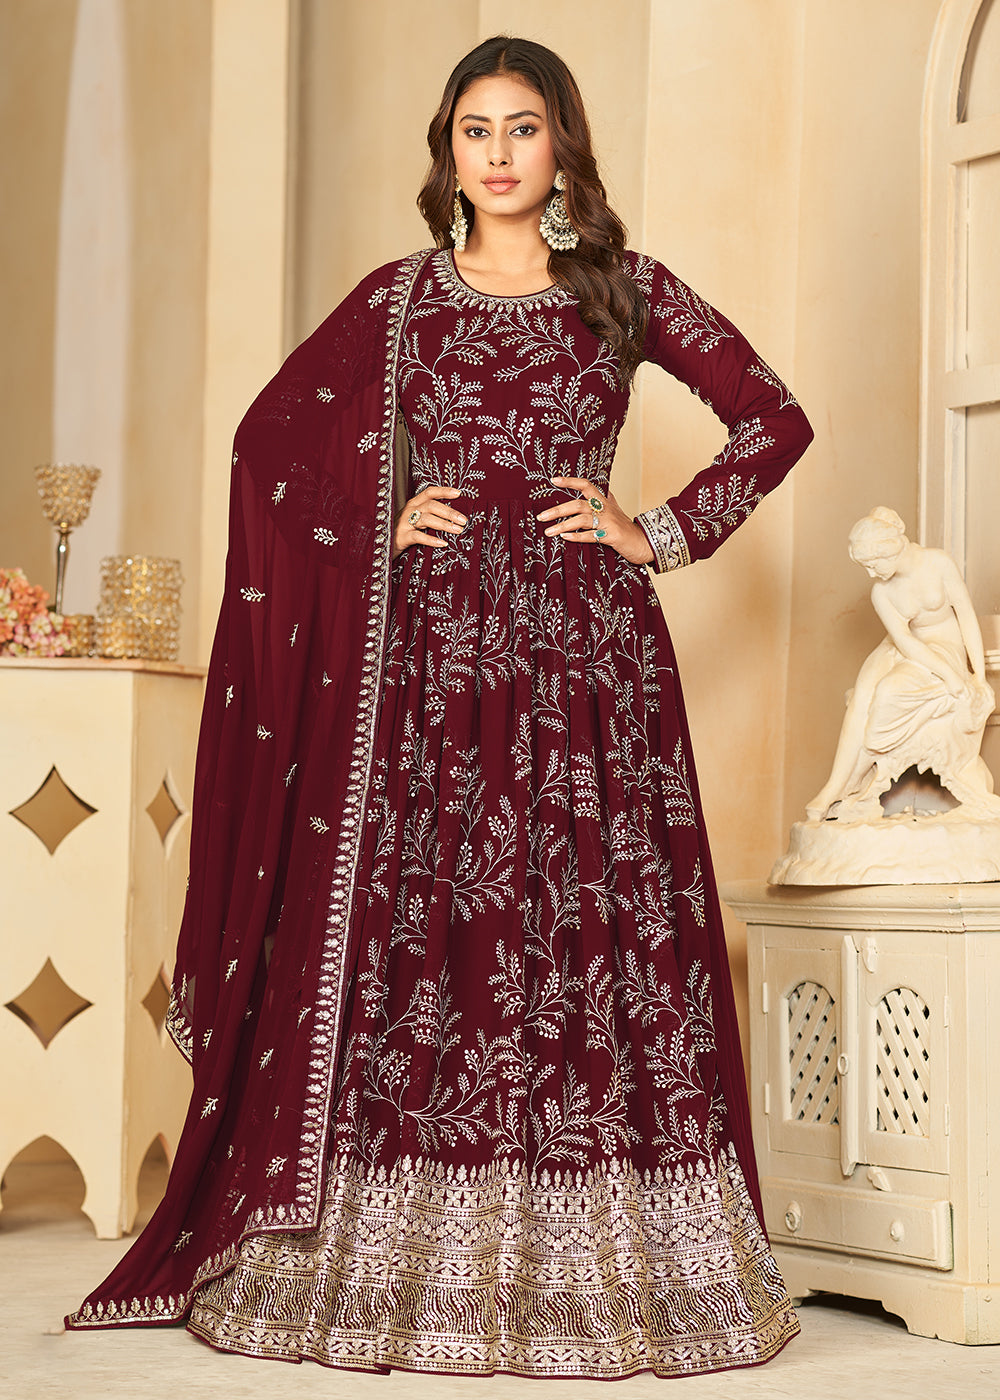 Buy Ethnic Yard Georgette Partywear Anarkali Dress Material Maroon color  Online at Low Prices in India - Paytmmall.com